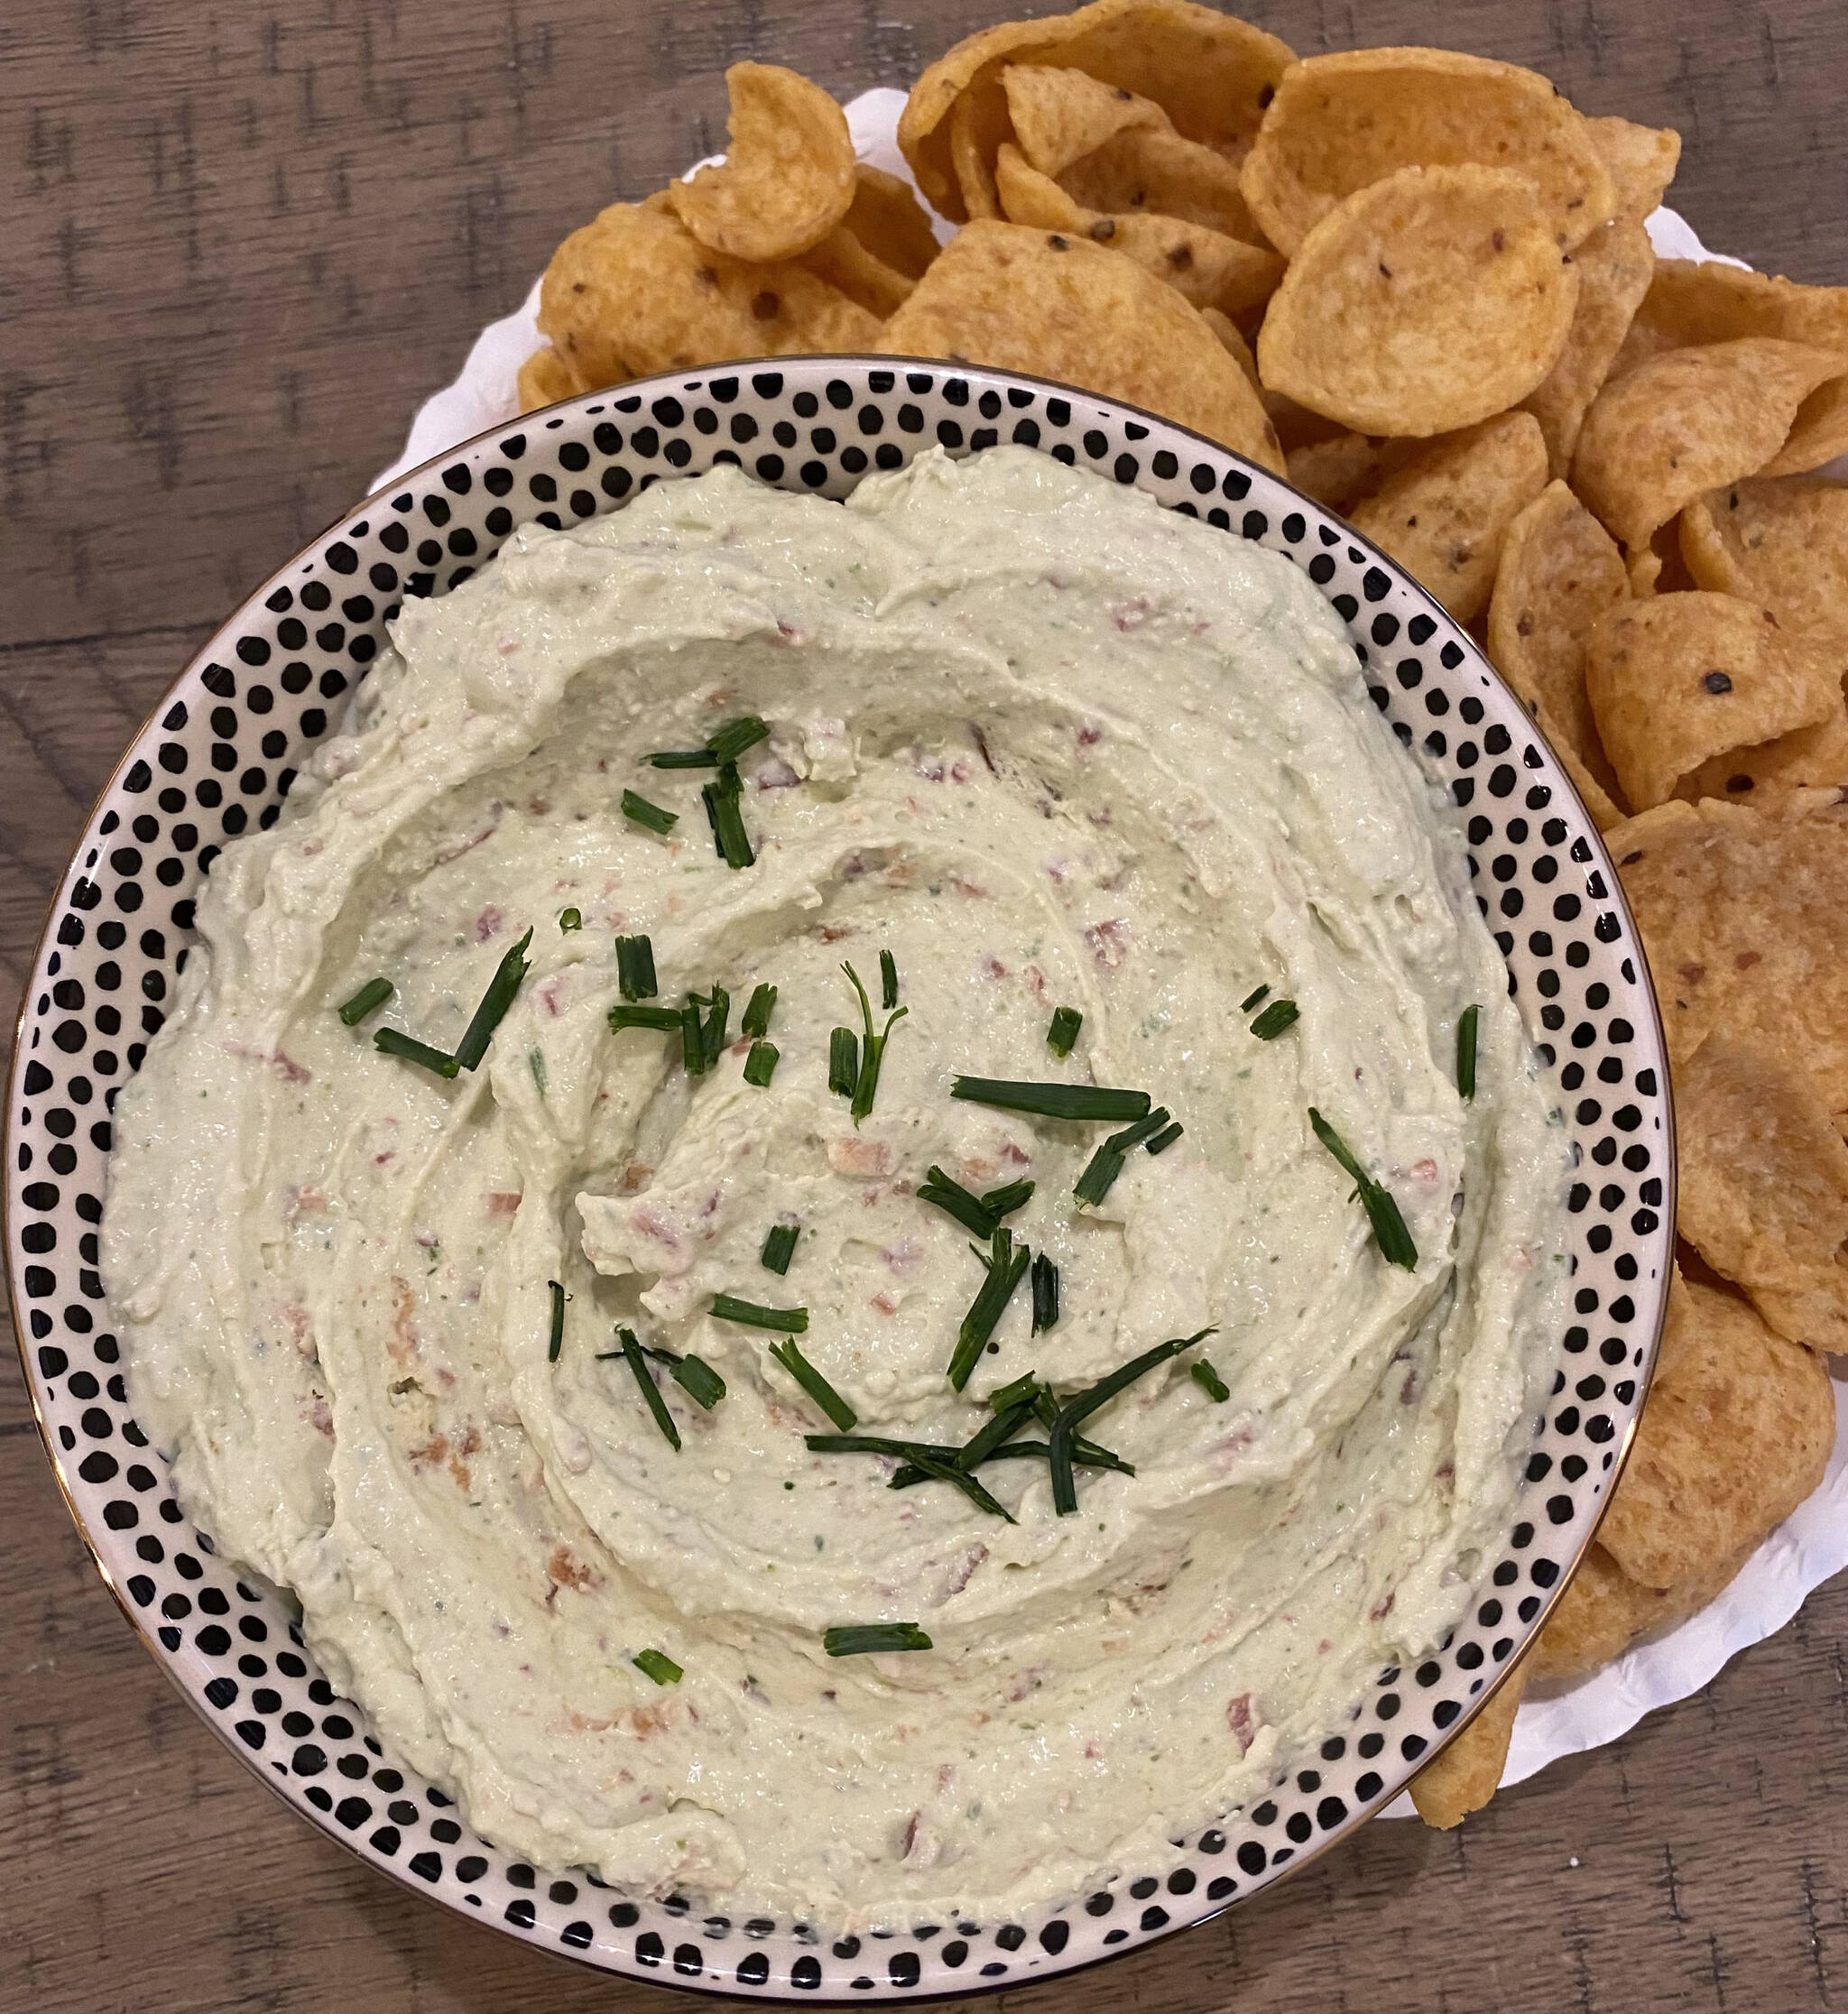 This jalapeno popper dip will brighten up any spread with subtle spice. (Photo by Tressa Dale/Peninsula Clarion)